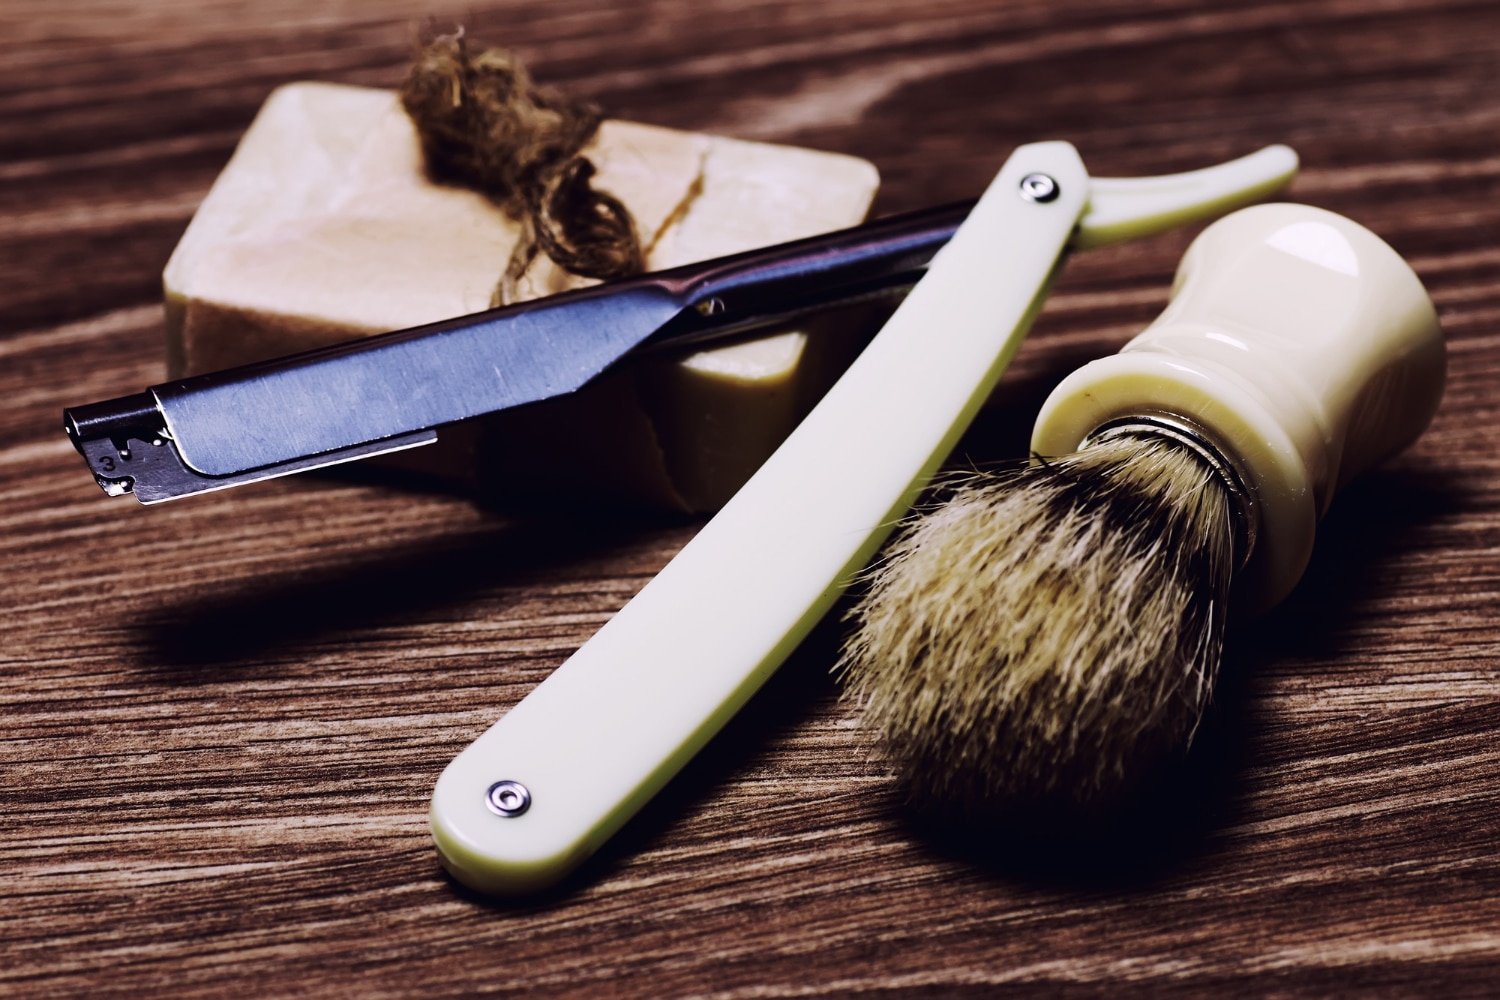 Shave Smoothly And Sustainably With Friction Free Shaving’s Eco-Friendly Razors